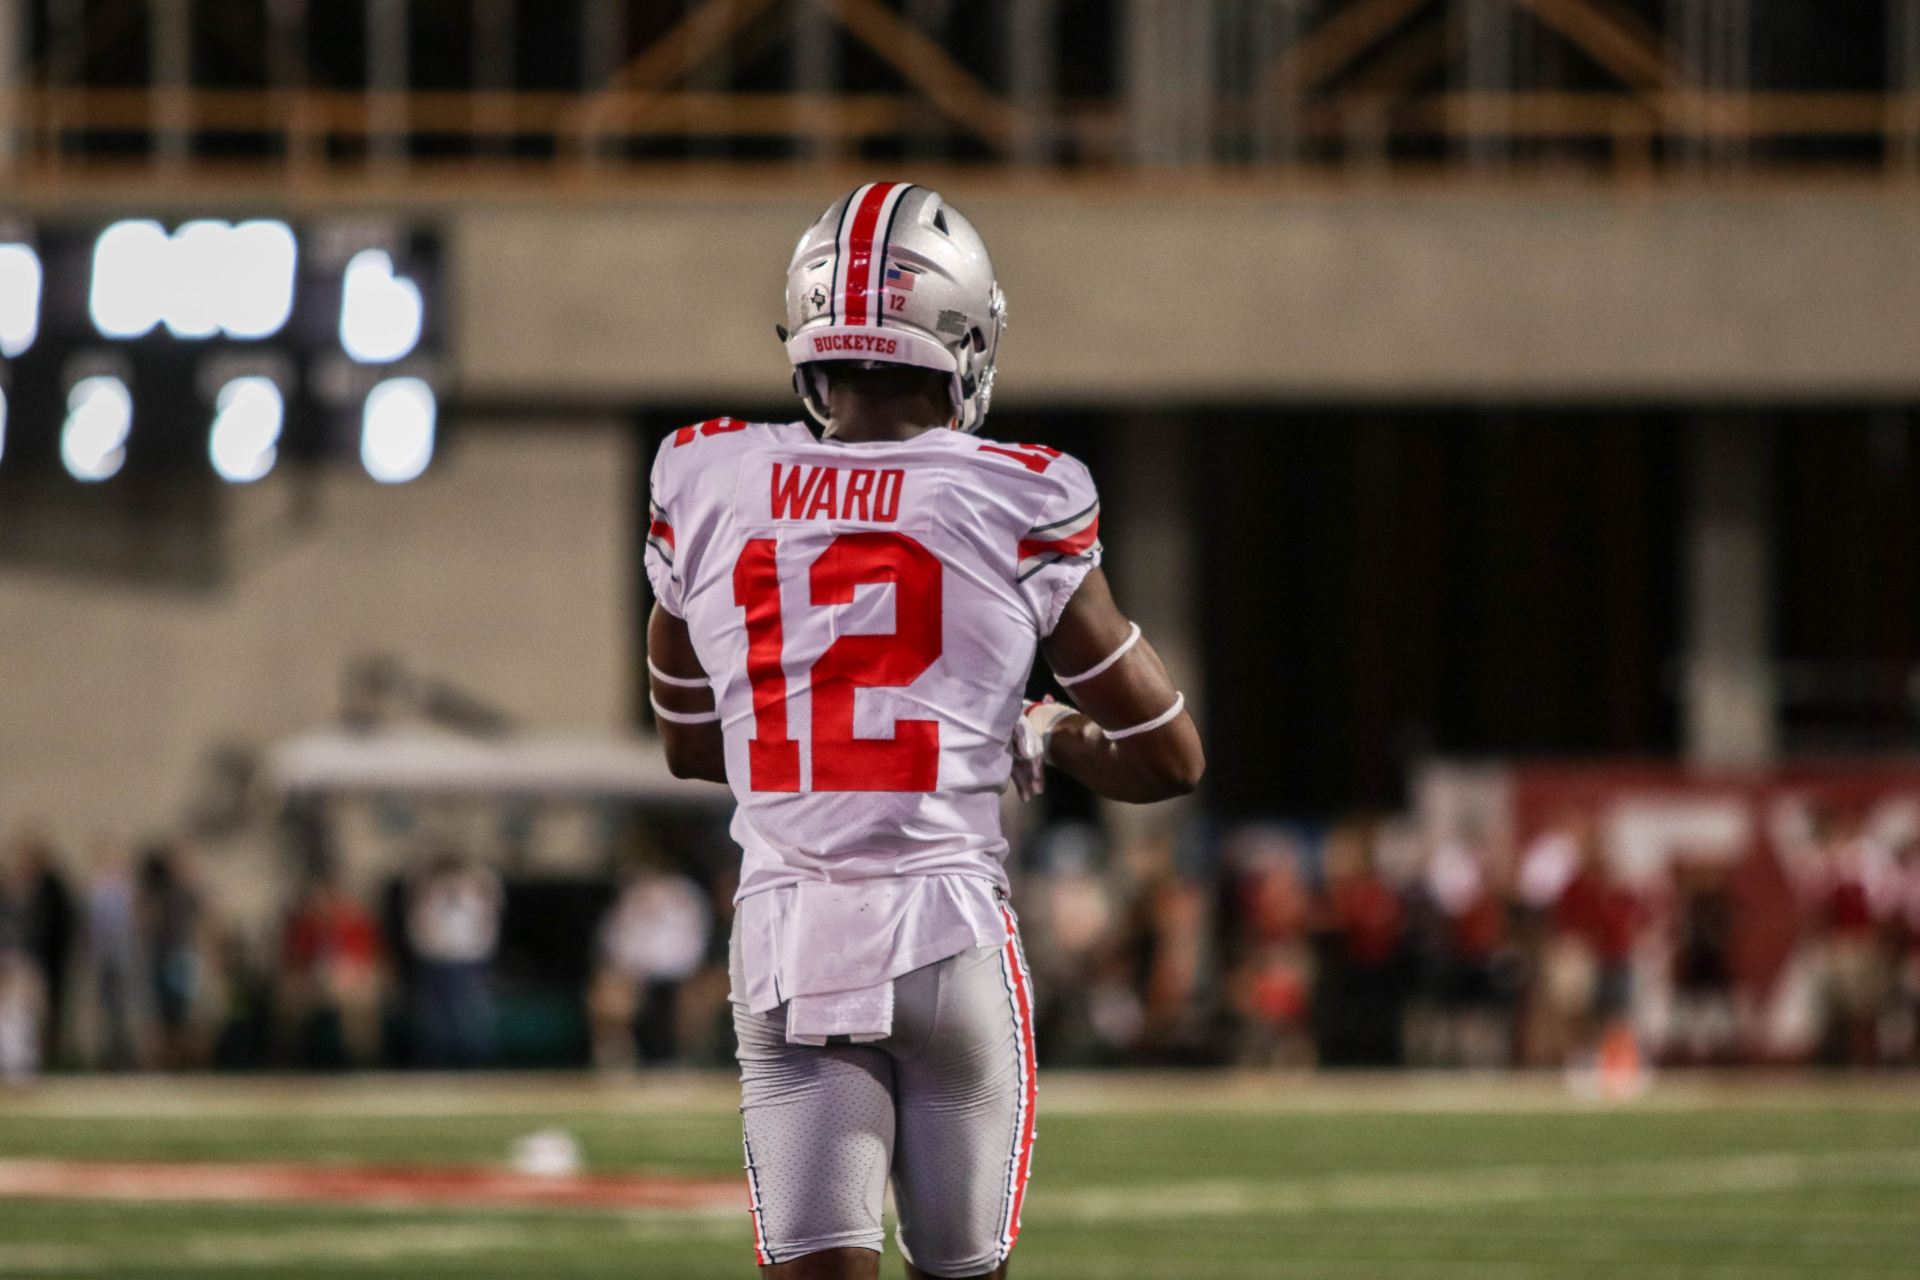 2018 NFL Draft results Denzel Ward to the Browns with No 4 pick   LandGrant Holy Land